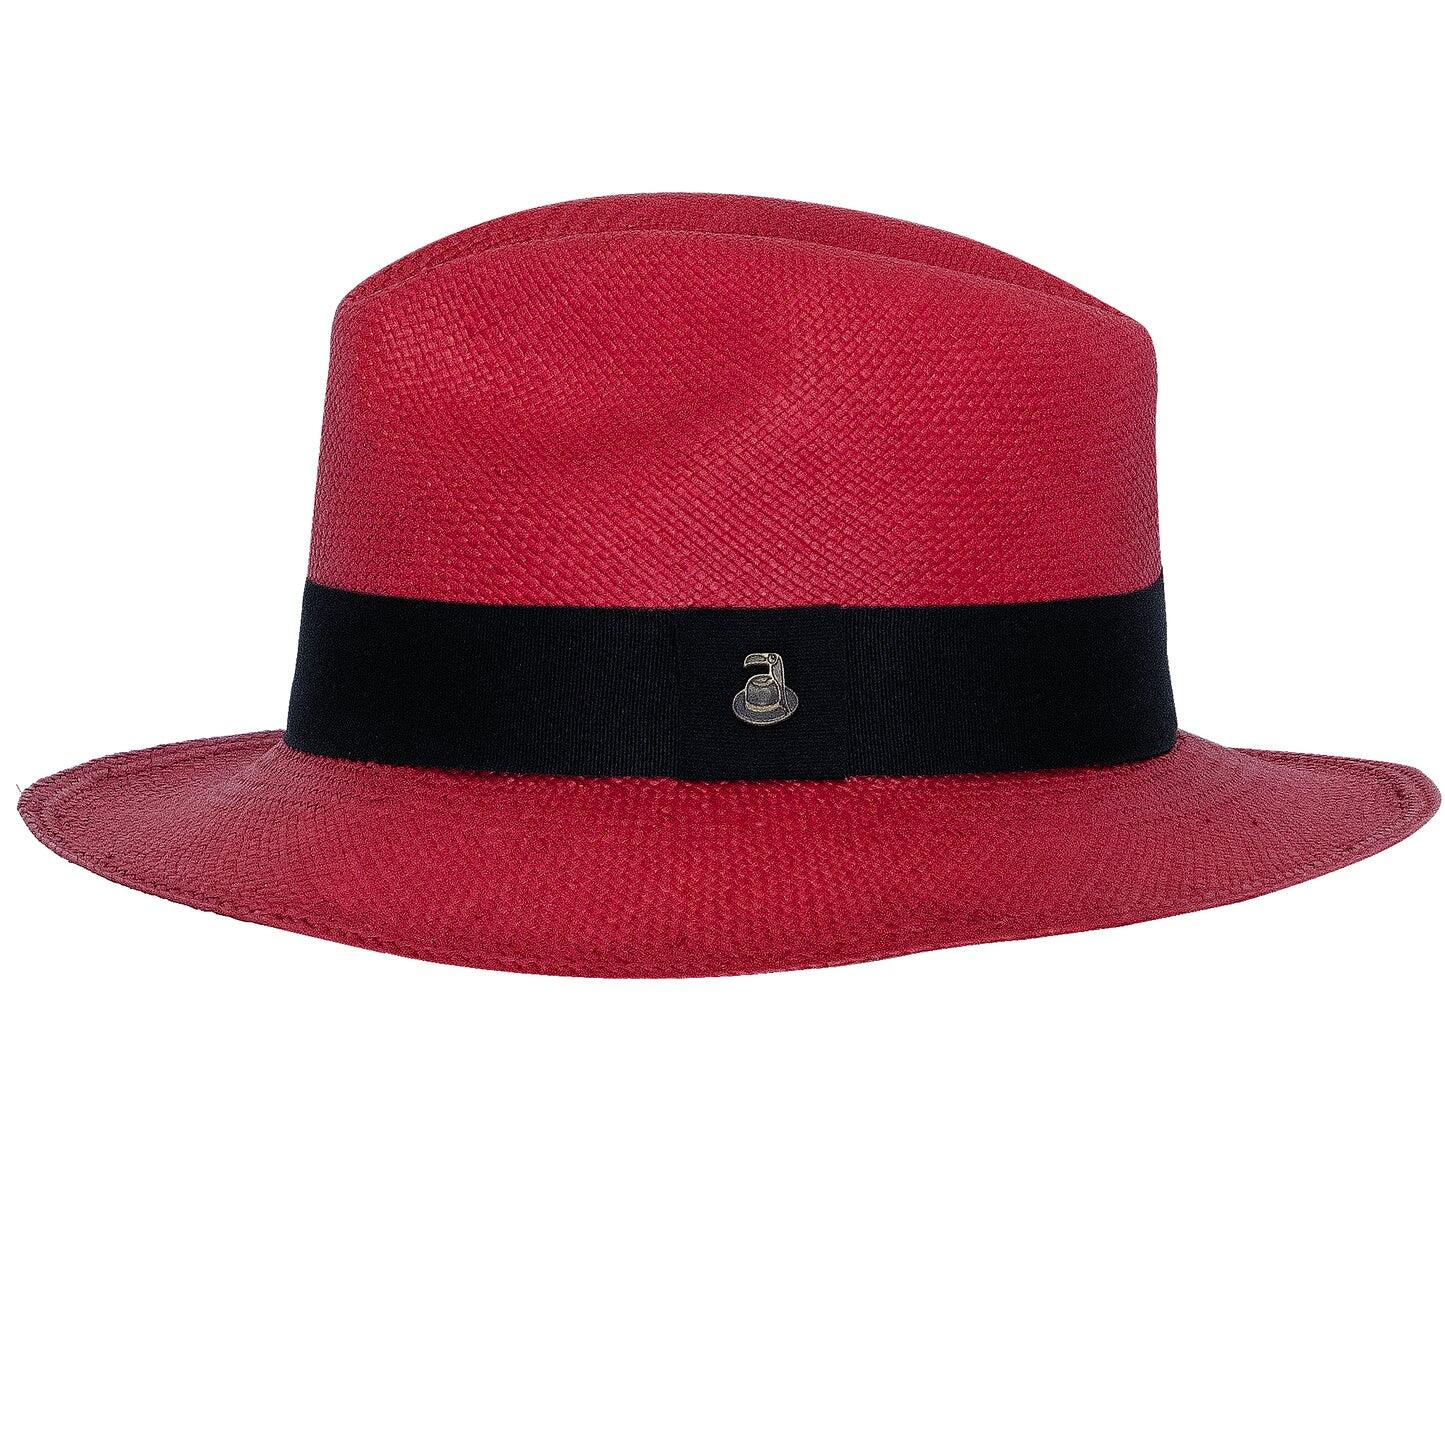 Panama Hat Unisex Classic Red with Black Band